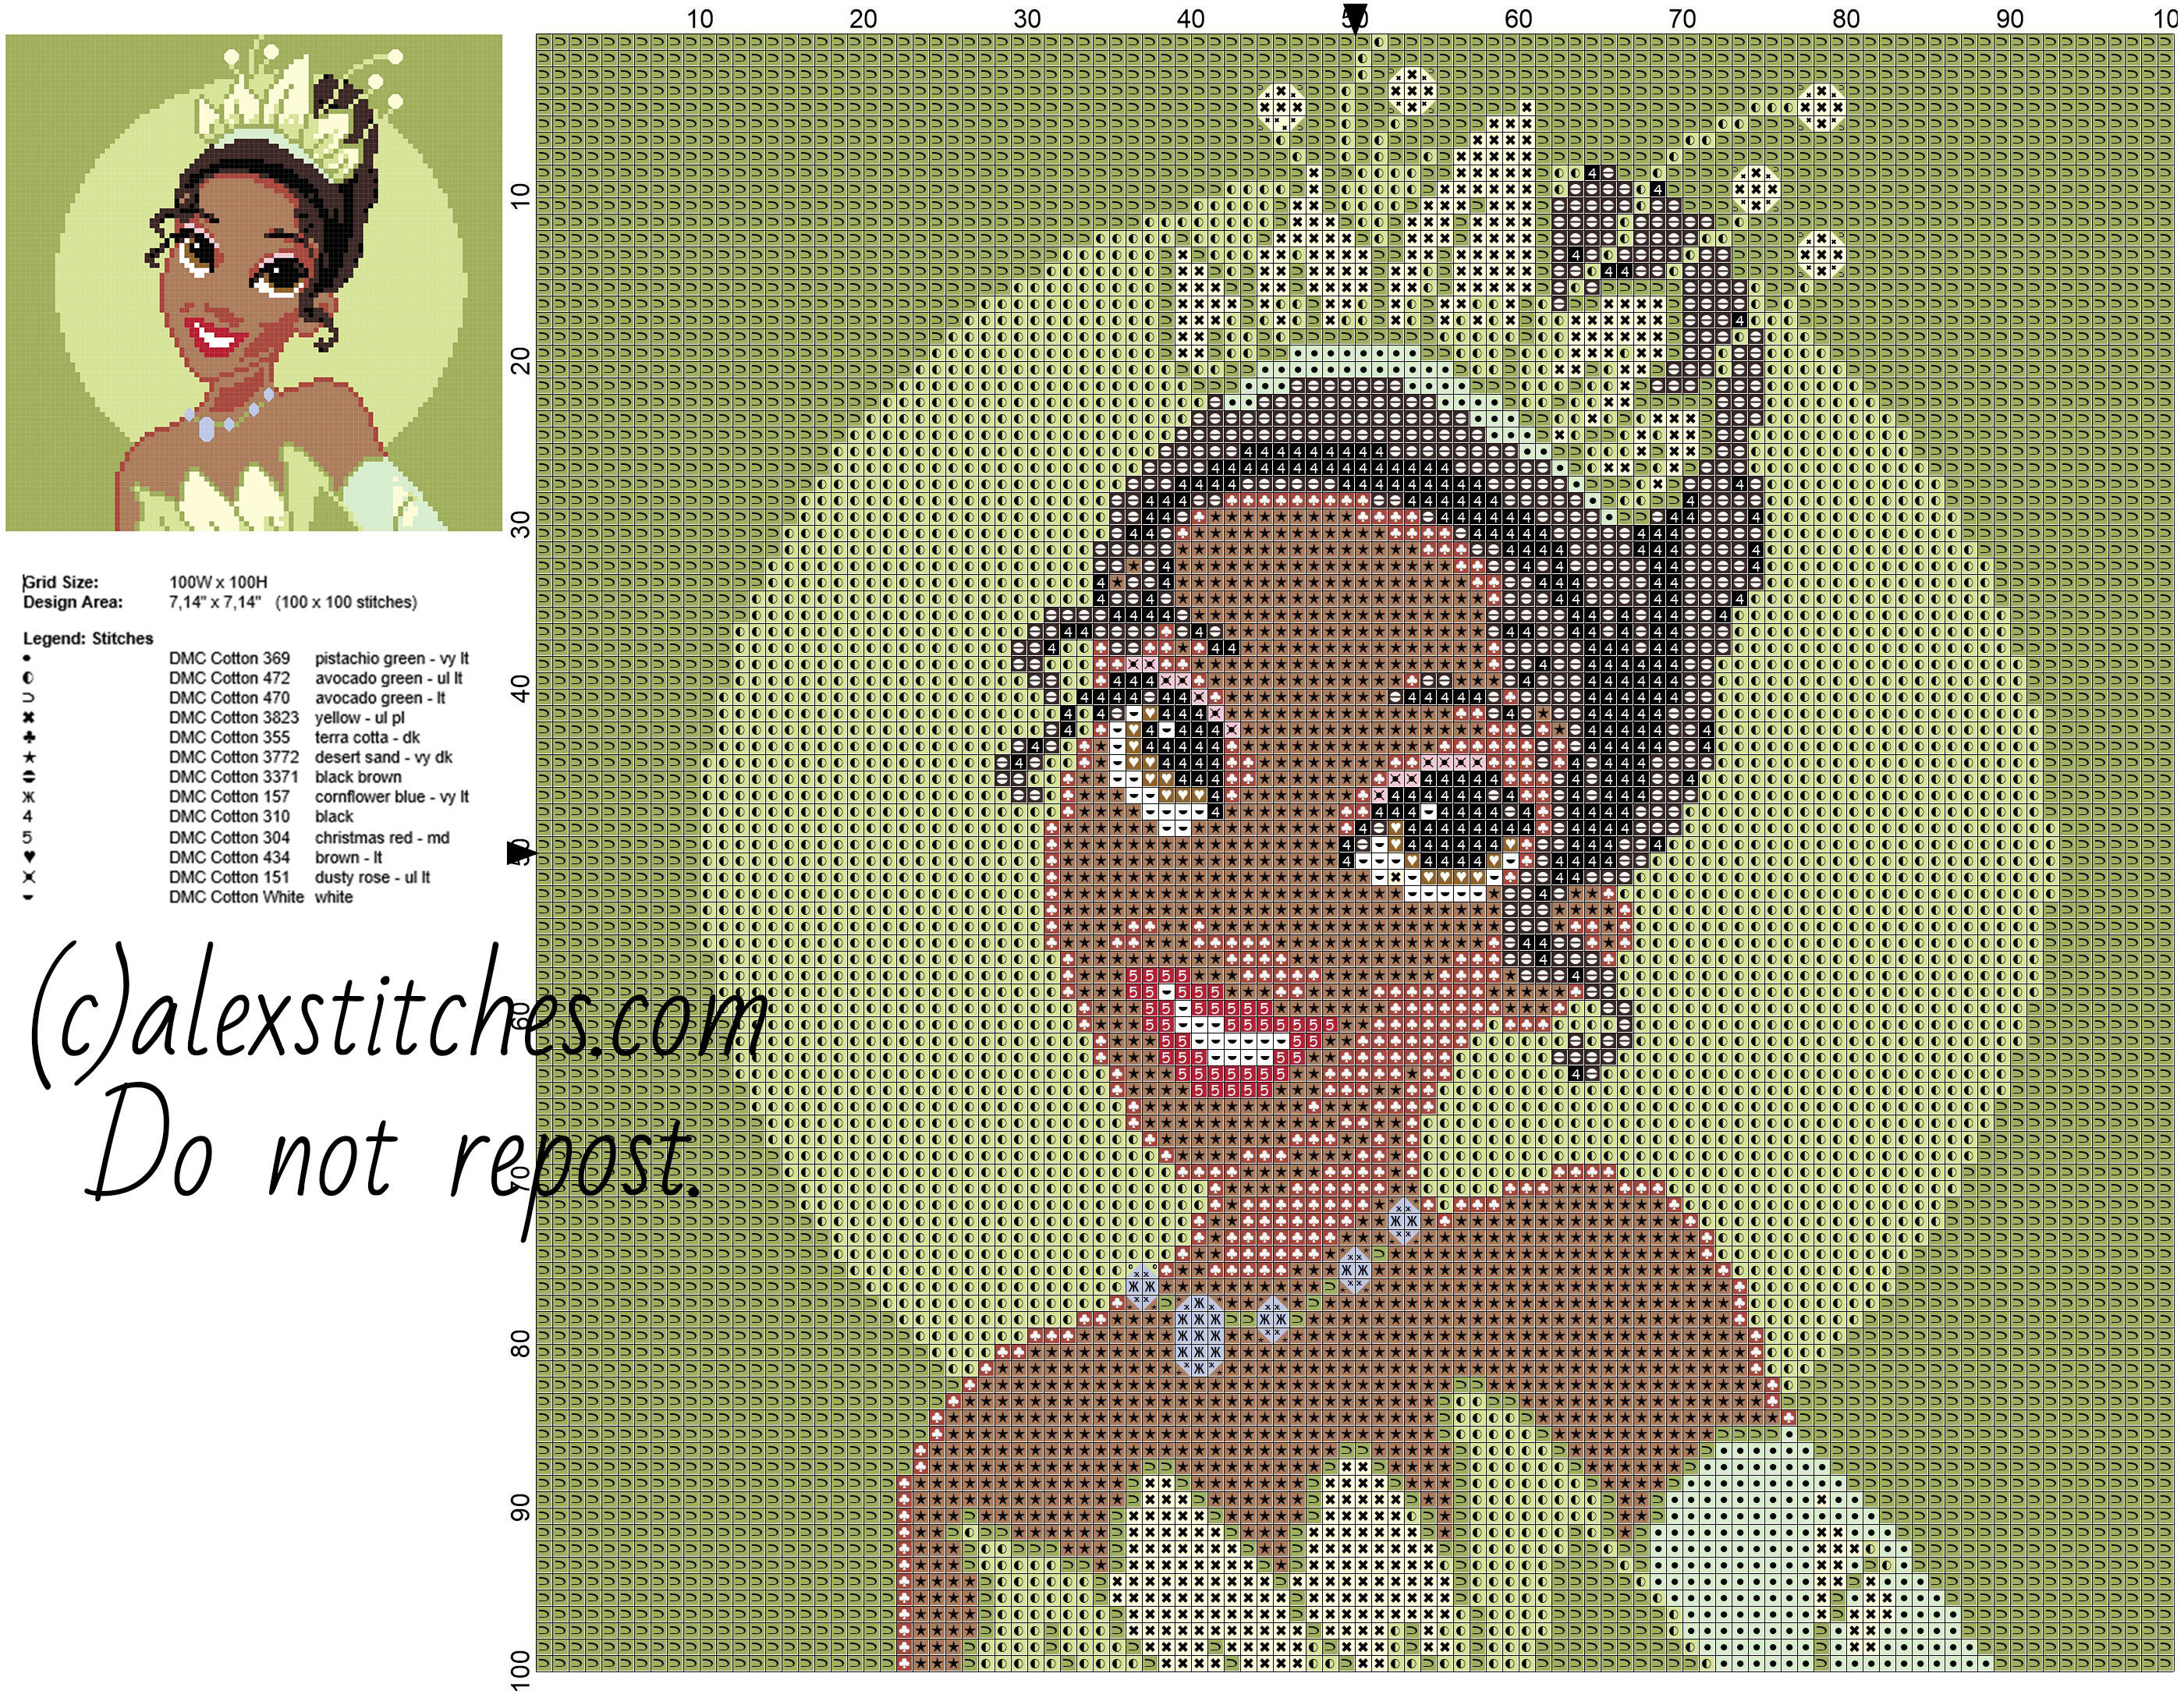 Disney Princess Tiana from The Princess and The Frog movie colored square face